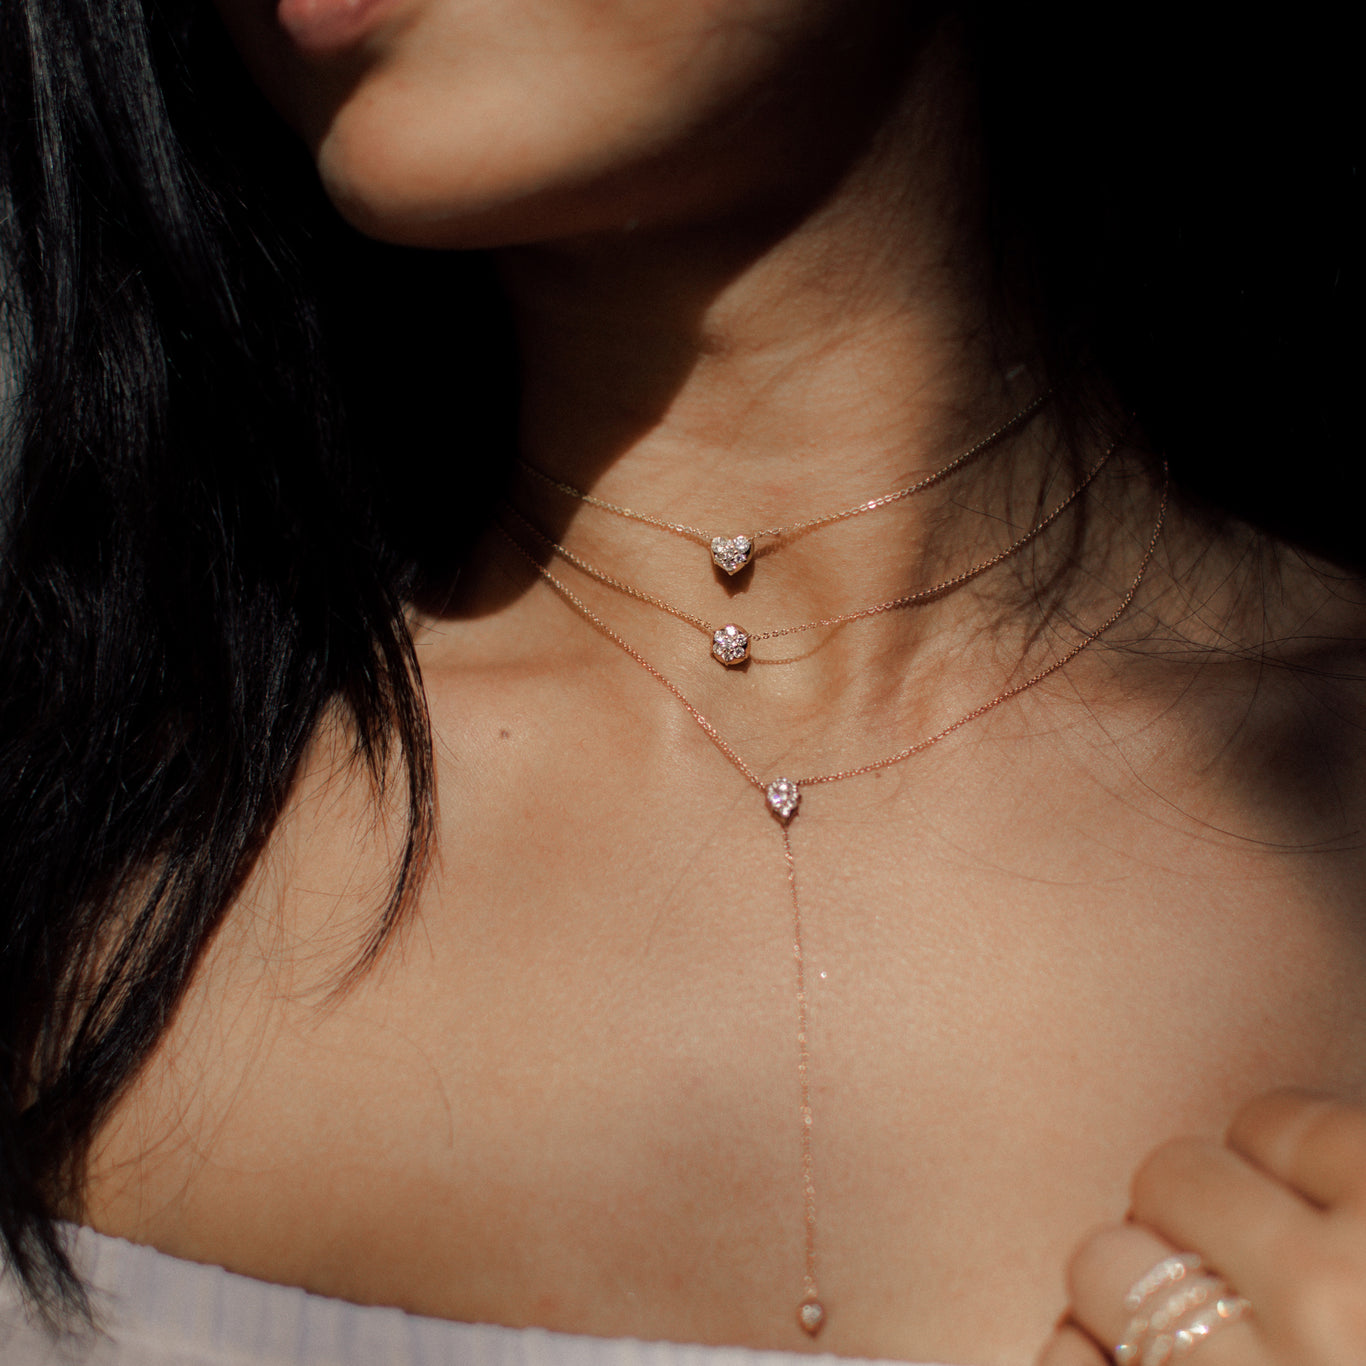 The Heart Choker Chain shown beautifully layered with the Bullet Choker Chain and Stella Lariat Necklace.